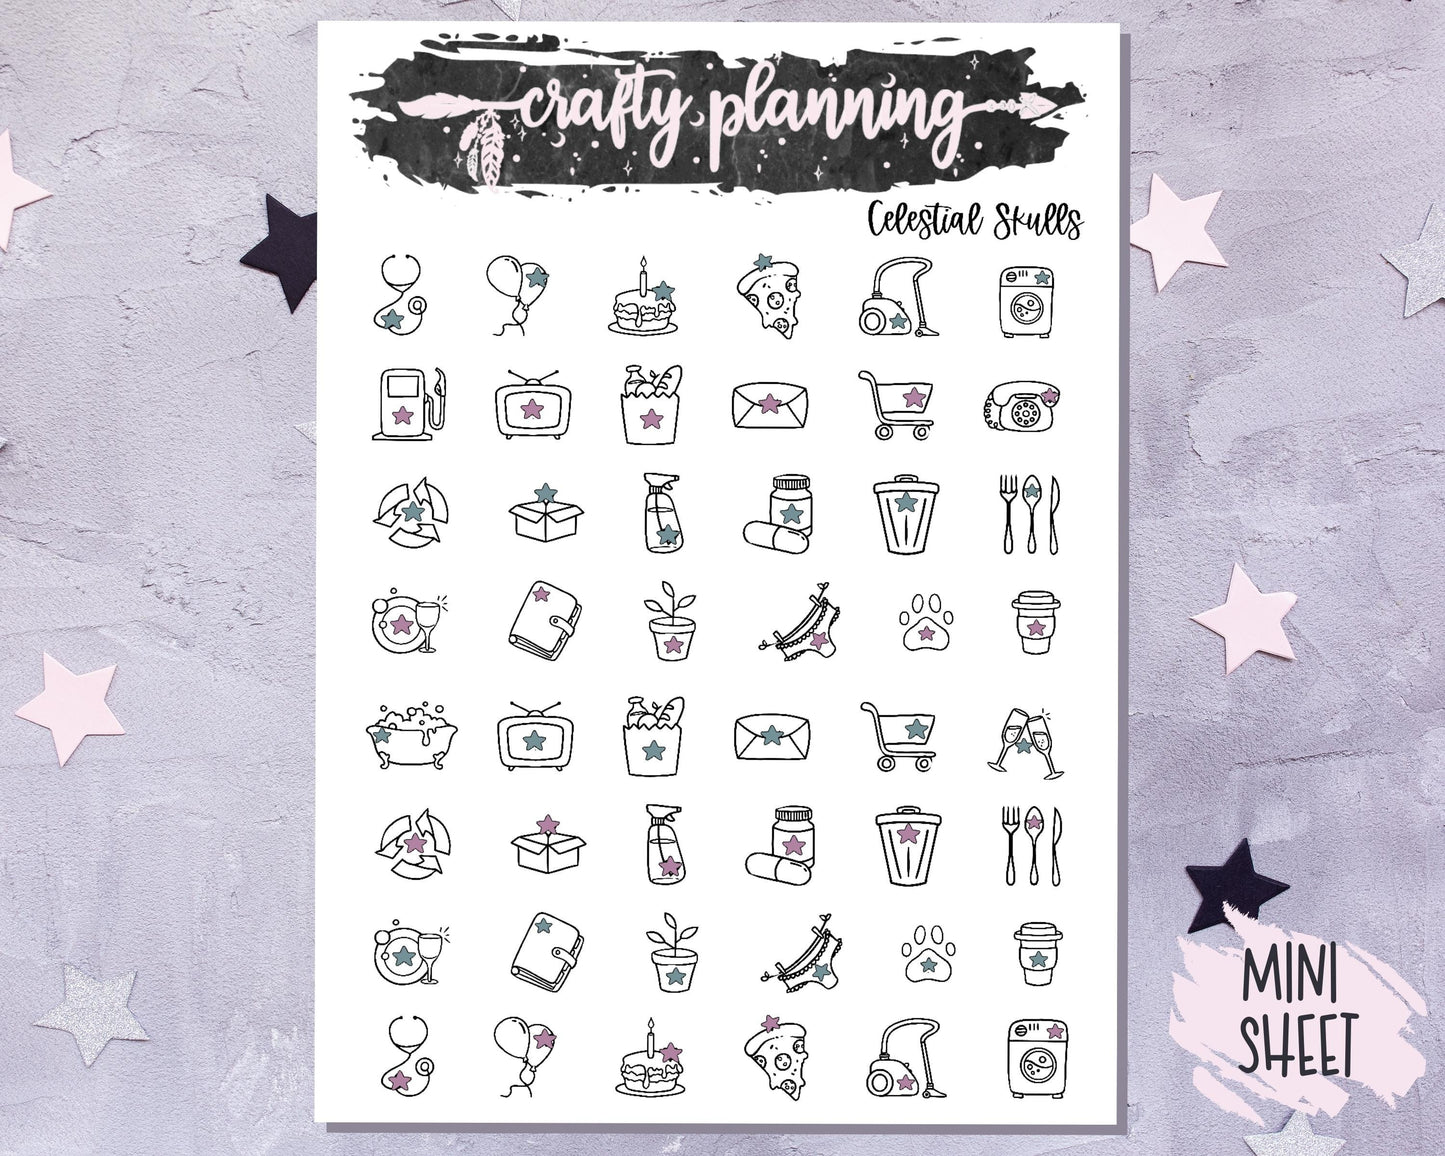 Gothic Stickers, Vertical Planner, Weekly Planner Kit, Planner Stickers, Goth Stickers, Dark Stickers, Witchcraft Stickers, Journal Kit